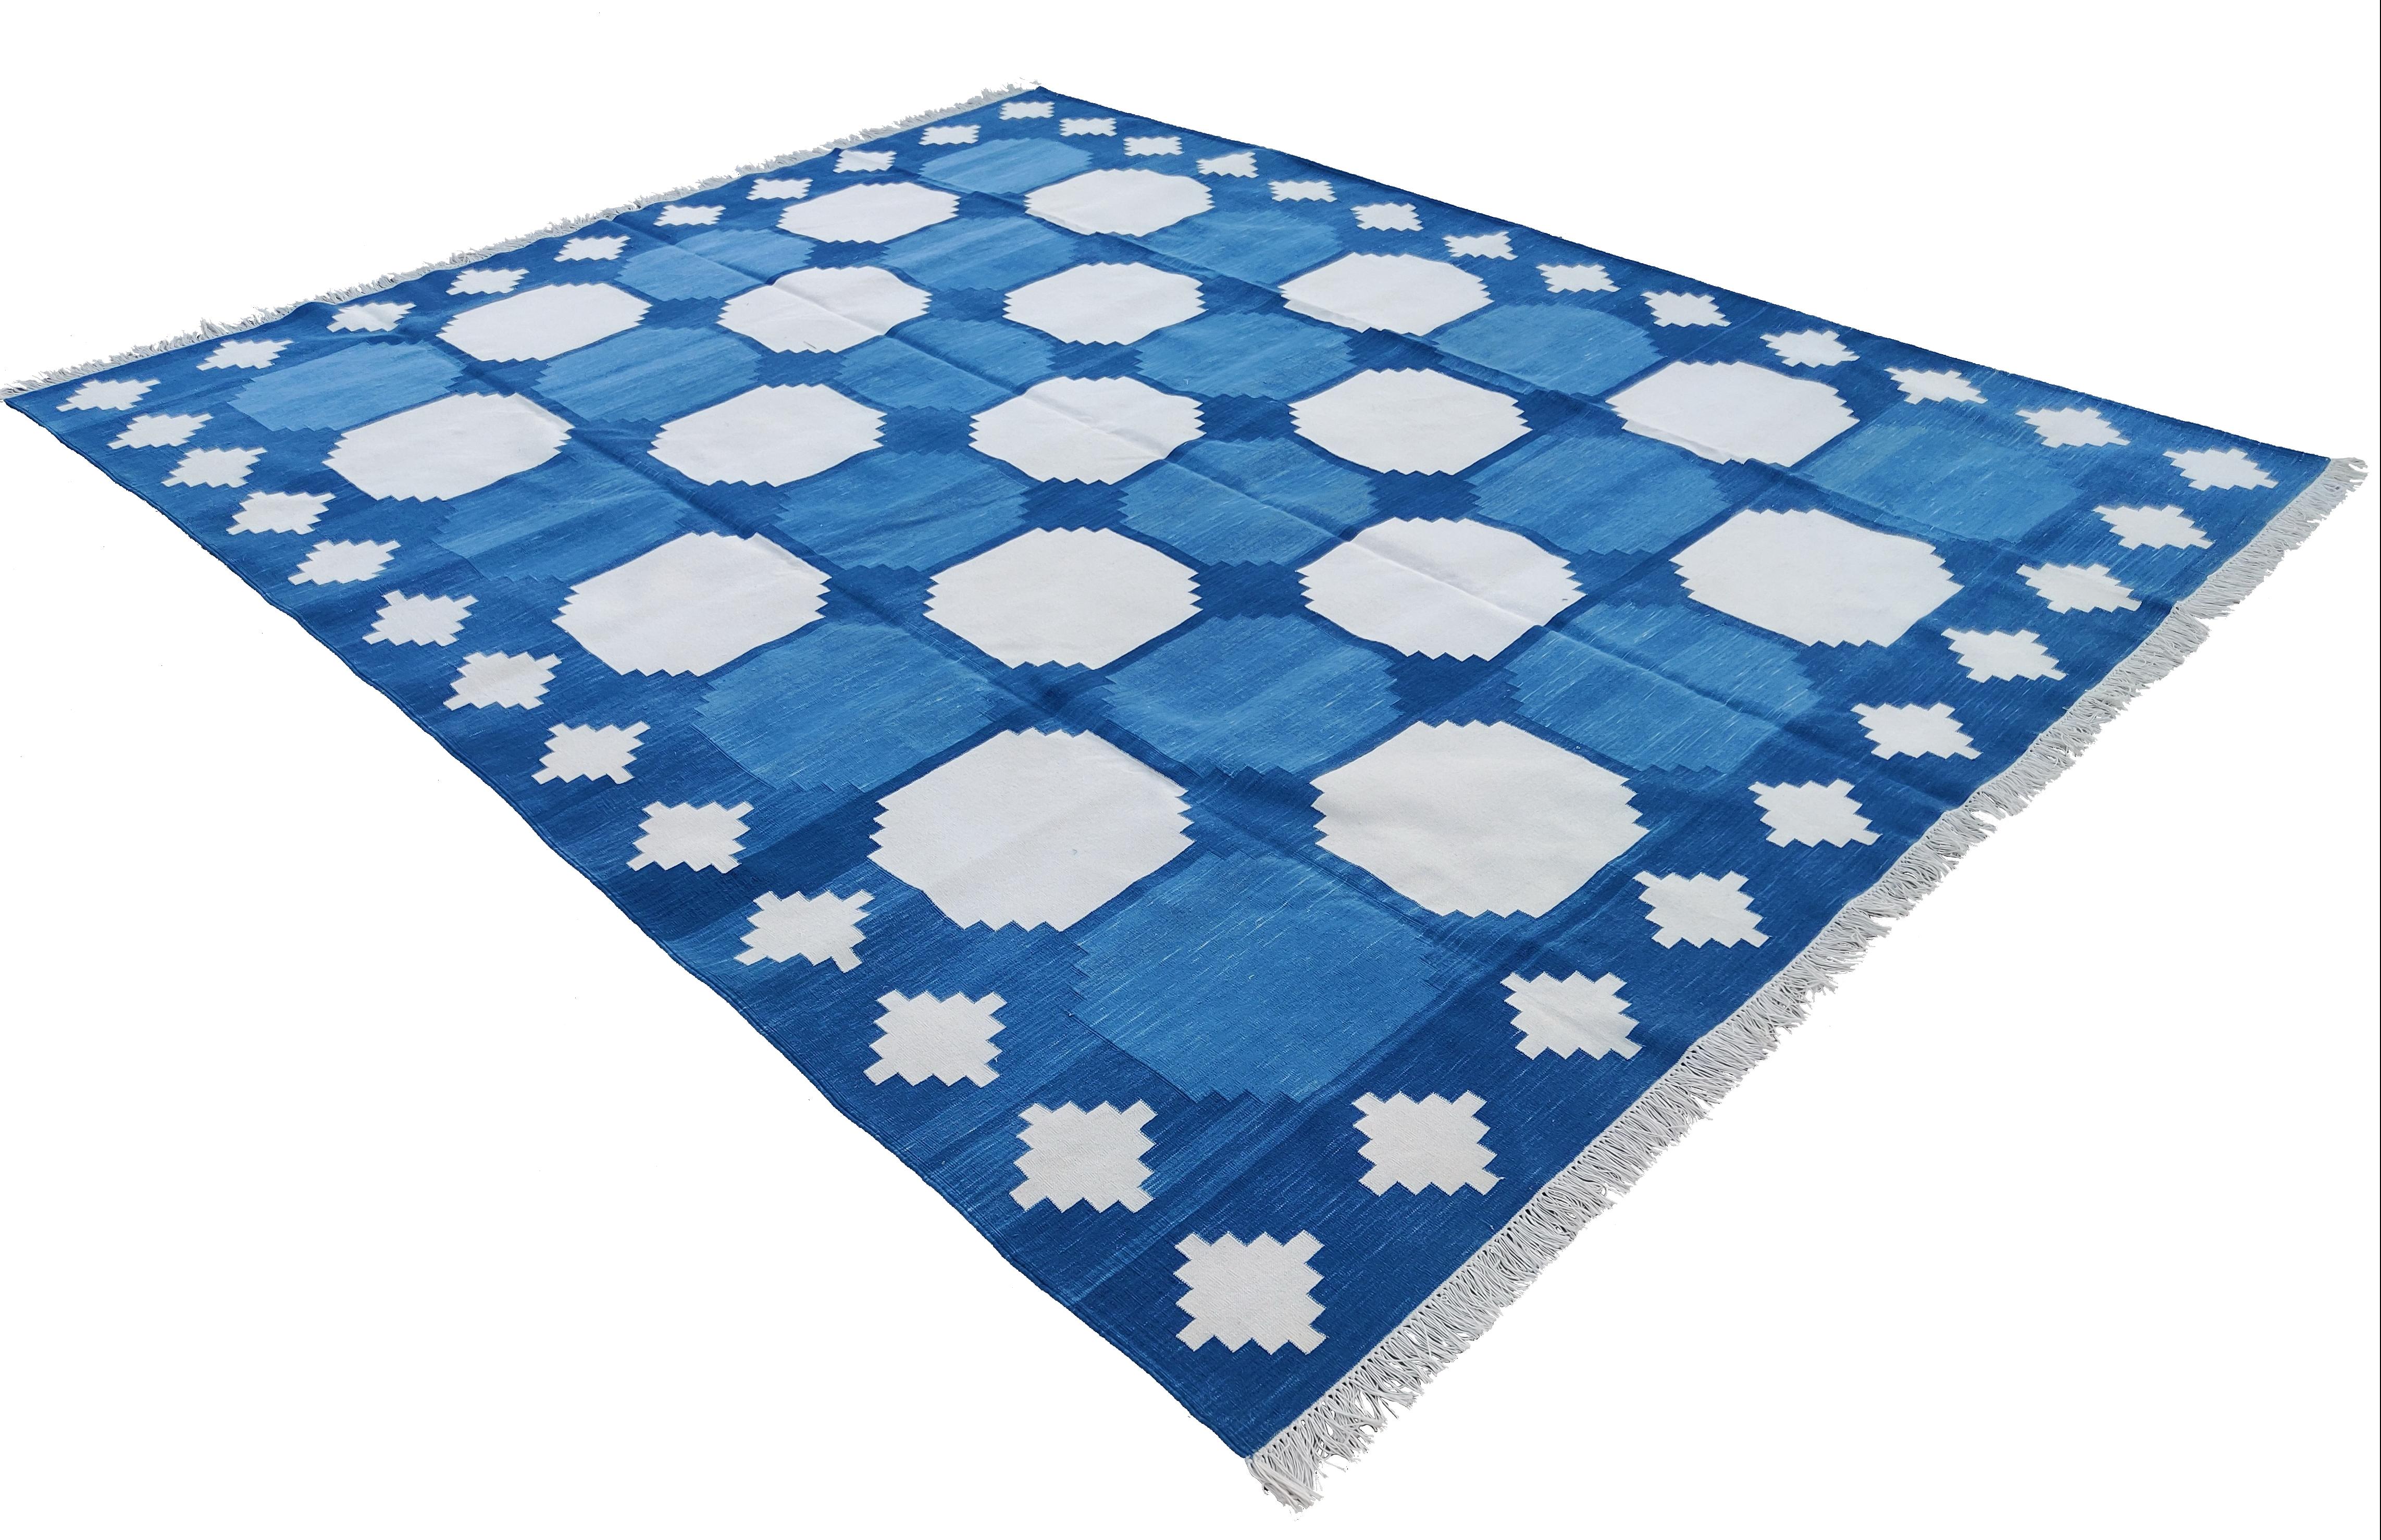 Cotton Vegetable Dyed Reversible Sky Blue And White Geometric Patterned Tile Indian Rug - 6'x9'
These special flat-weave dhurries are hand-woven with 15 ply 100% cotton yarn. Due to the special manufacturing techniques used to create our rugs, the